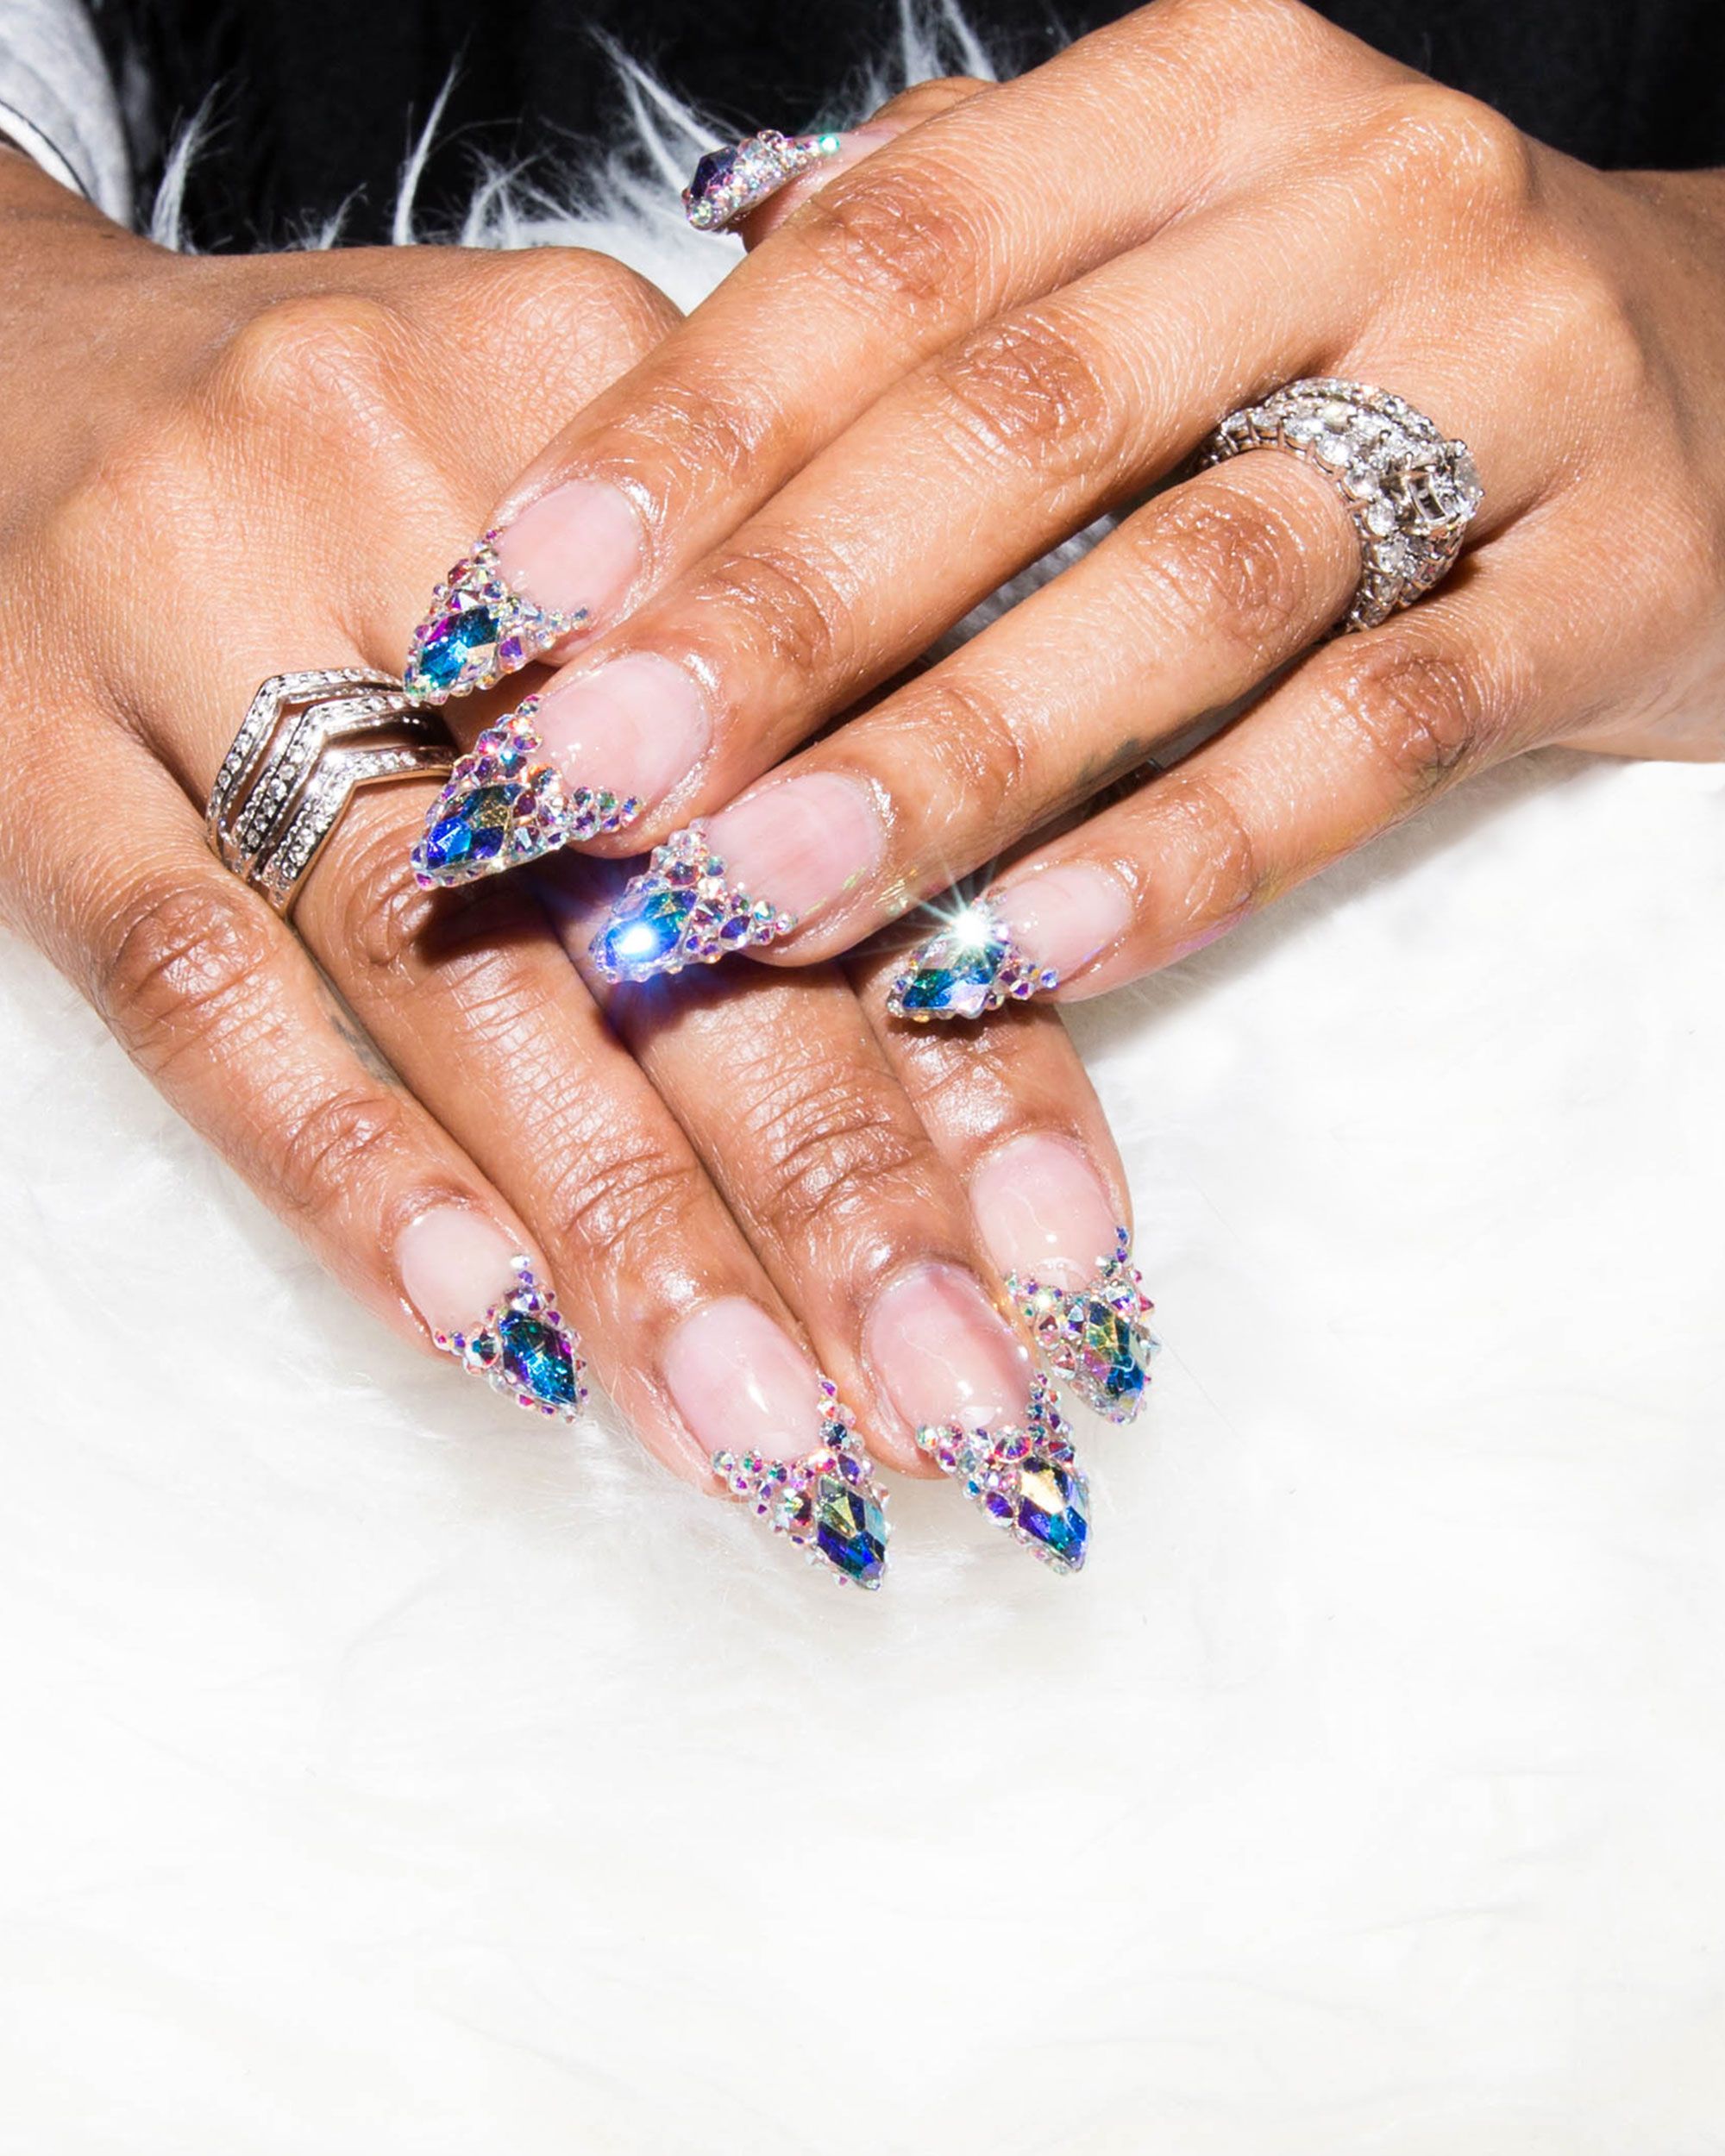 Cardi B Red Nail Art, Stones, Studs Nails | Steal Her Style